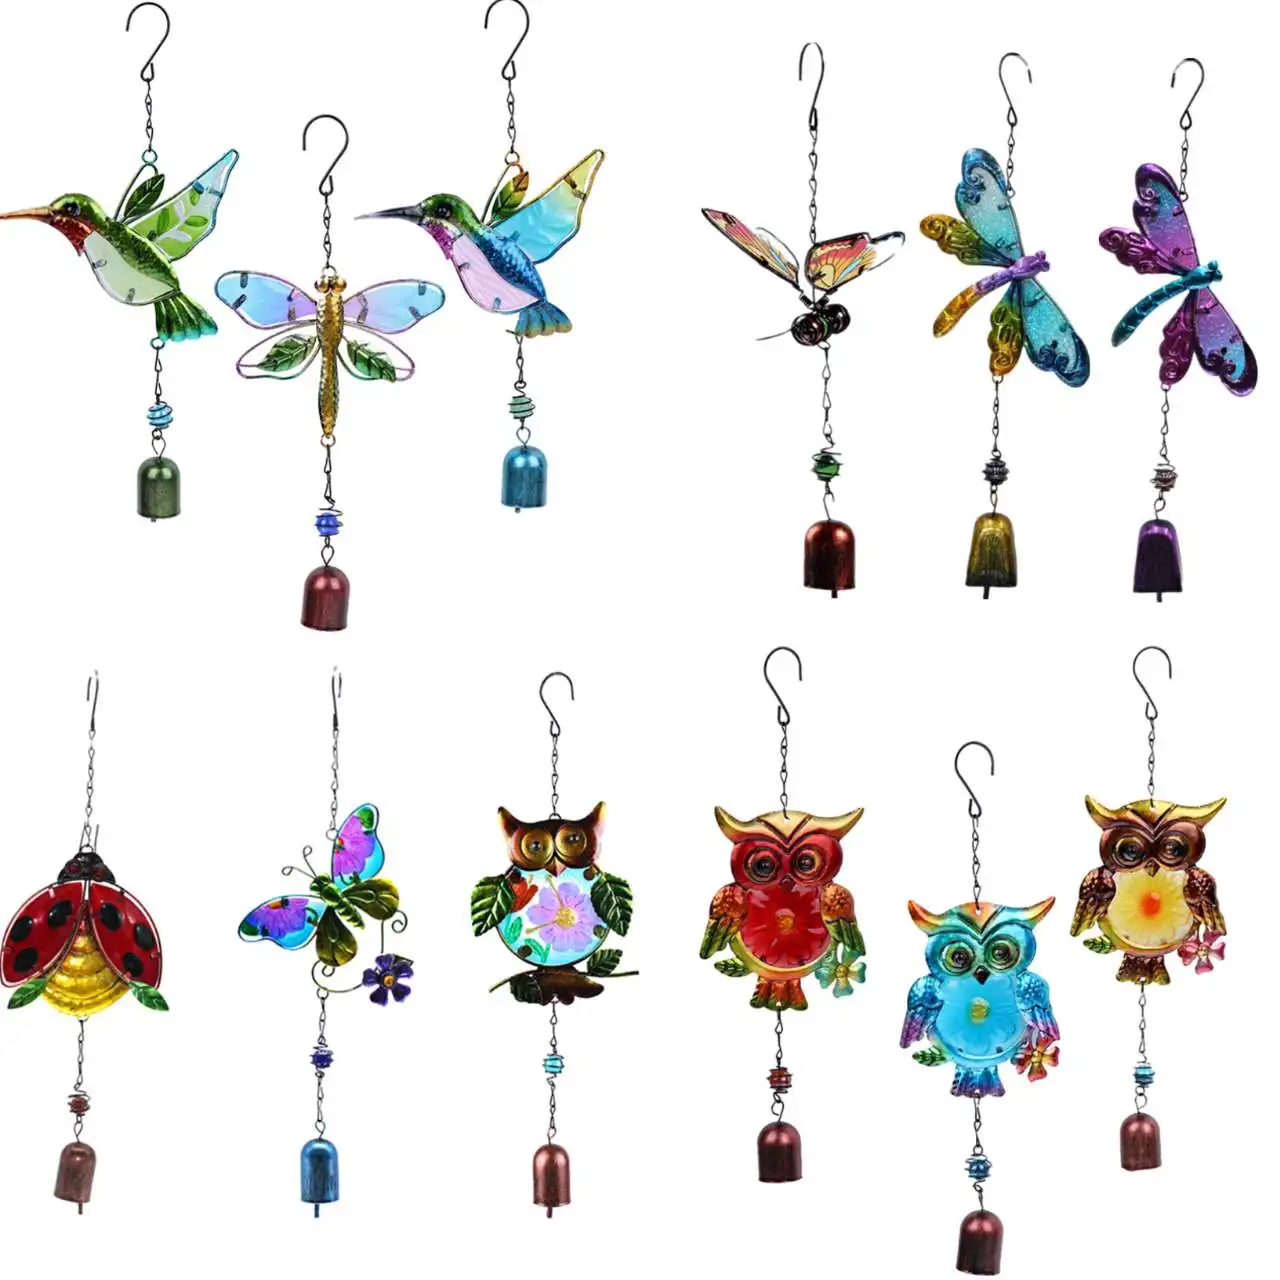 Handmade Bird Wind Chime For Wall Window Door Wind Bell Hanging Ornaments Vintage Home Campanula Decoration Crafts